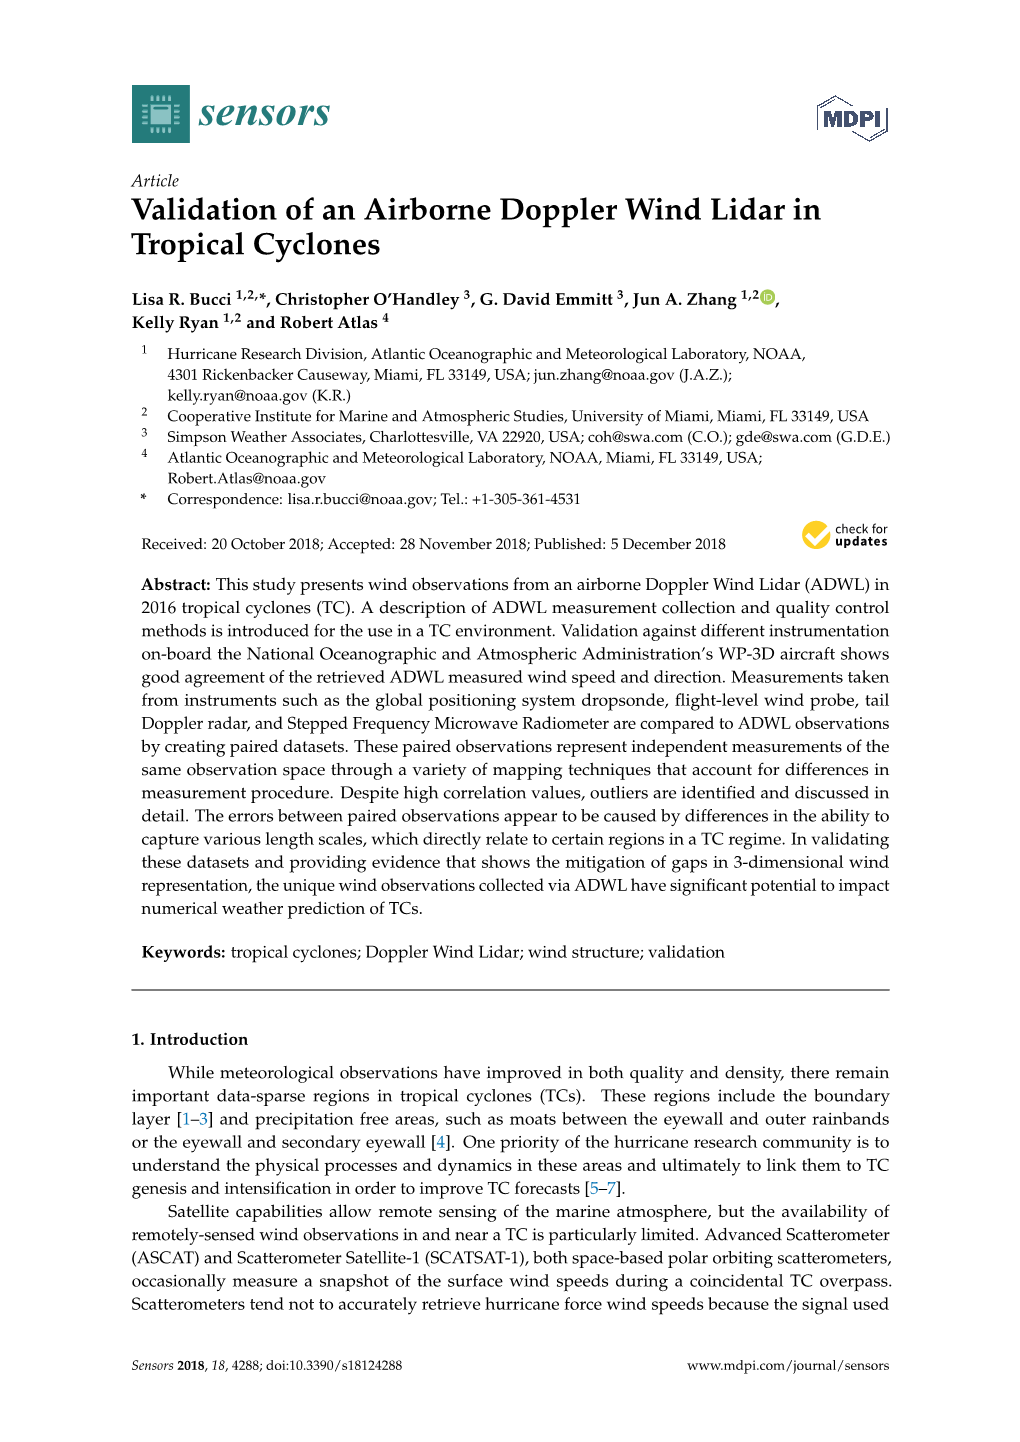 Validation of an Airborne Doppler Wind Lidar in Tropical Cyclones